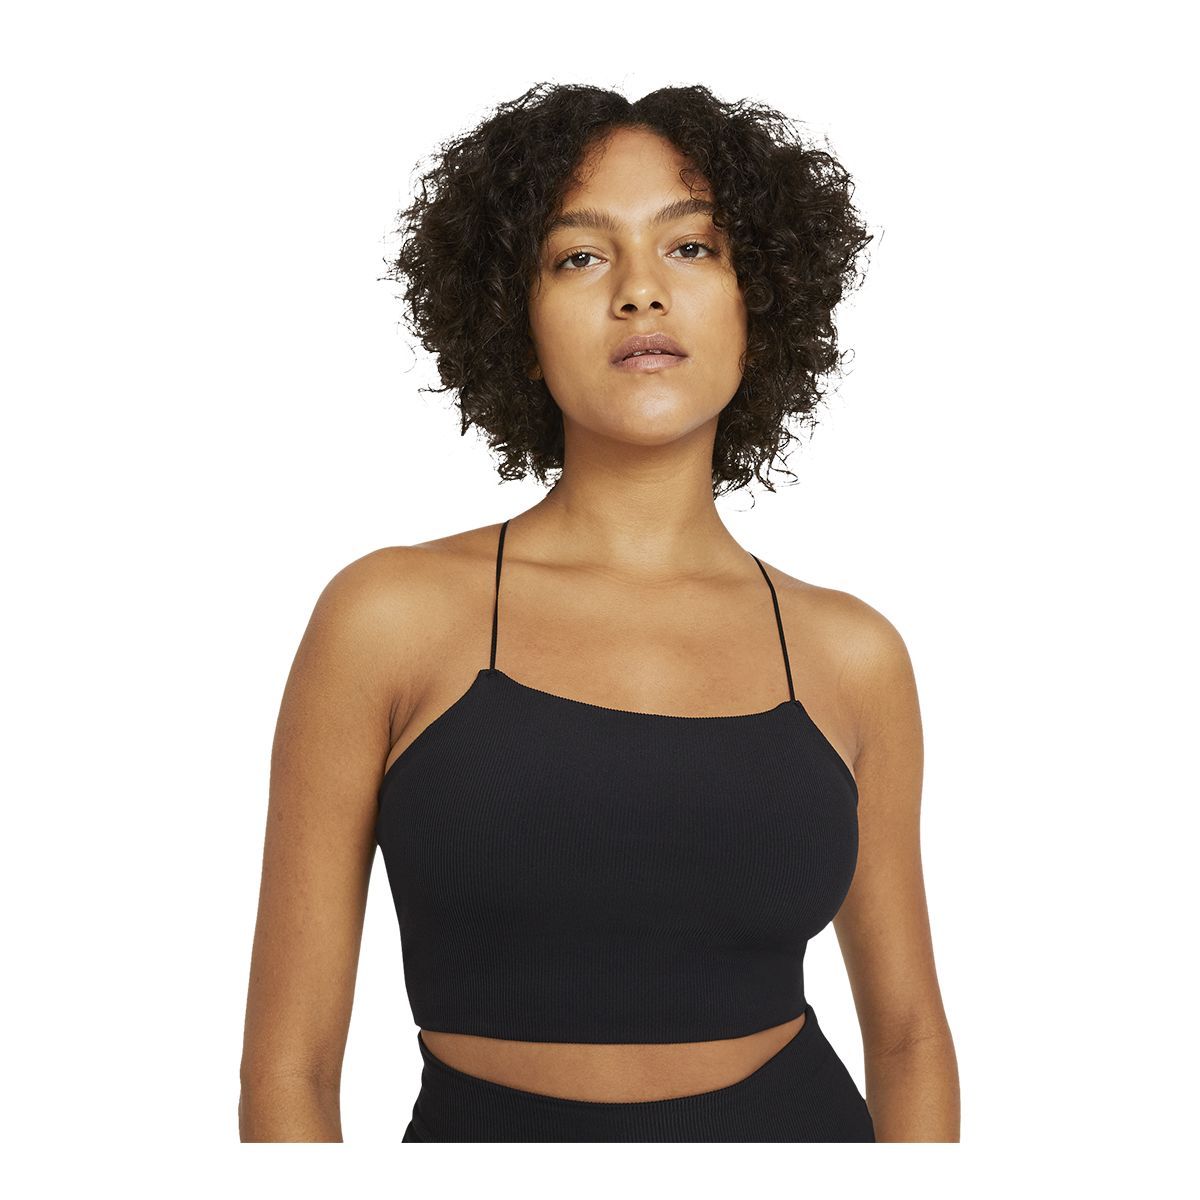 https://media-www.atmosphere.ca/product/div-03-softgoods/dpt-70-athletic-clothing/sdpt-02-womens/333309926/nike-w-yoga-luxe-strappy-cami-blk-greyblack-dk-smoke-grey-xs--2bbfa674-b4cd-4a28-9007-0ff9a5f1abe2-jpgrendition.jpg